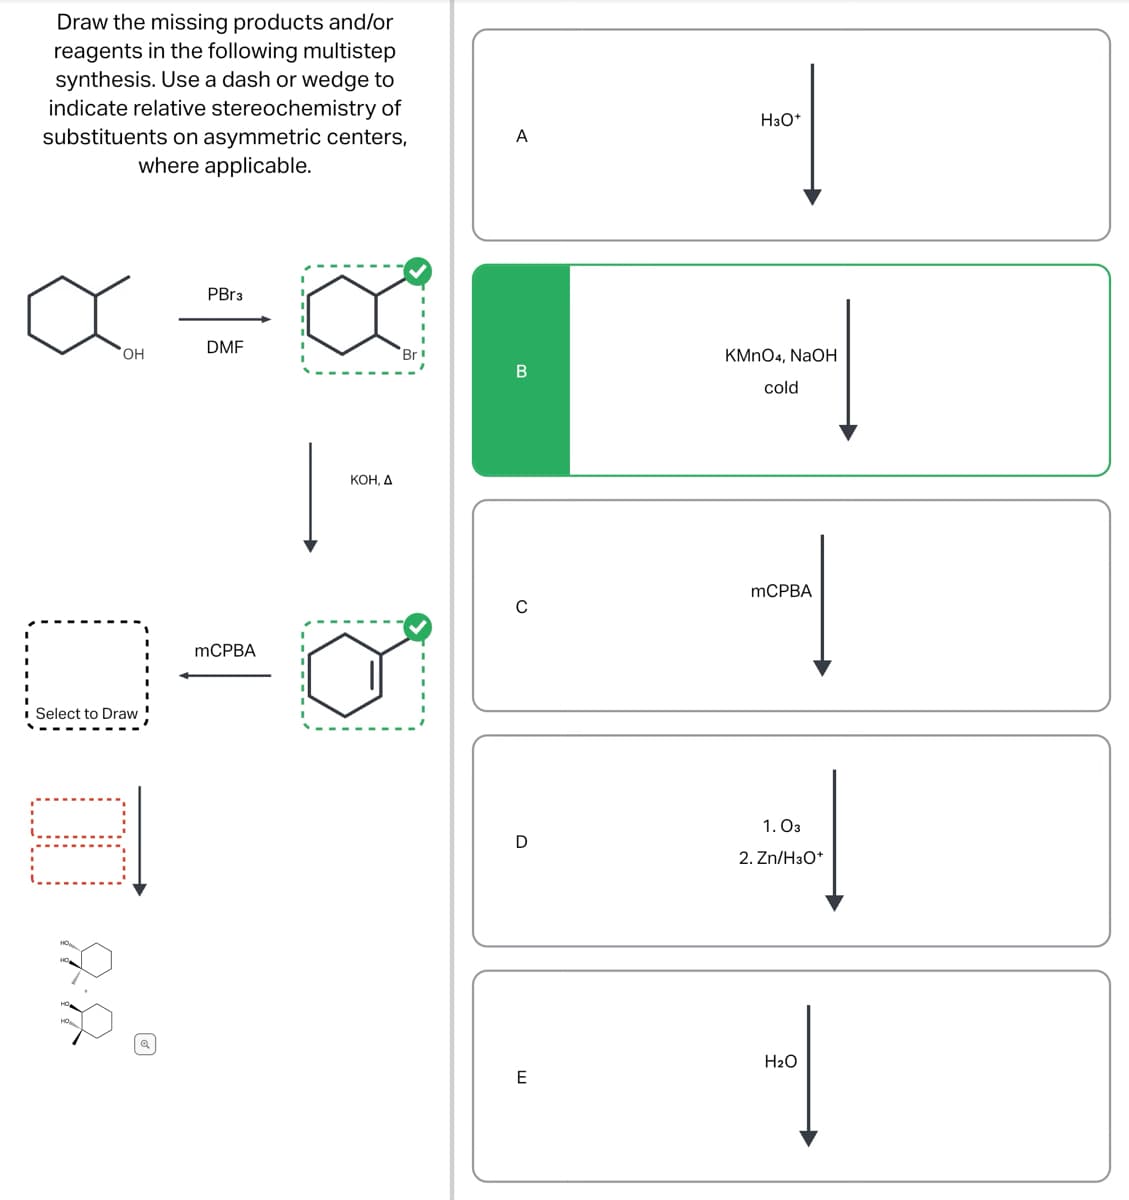 Draw the missing products and/or
reagents in the following multistep
synthesis. Use a dash or wedge to
indicate relative stereochemistry of
substituents on asymmetric centers,
where applicable.
a
OH
O
Select to Draw
E
PBr3
DMF
mCPBA
a
Br
KOH, A
A
B
C
D
E
|
H3O+
KMnO4, NaOH
cold
-
mCPBA
1.03
#
2. Zn/H3O+
H₂O
1